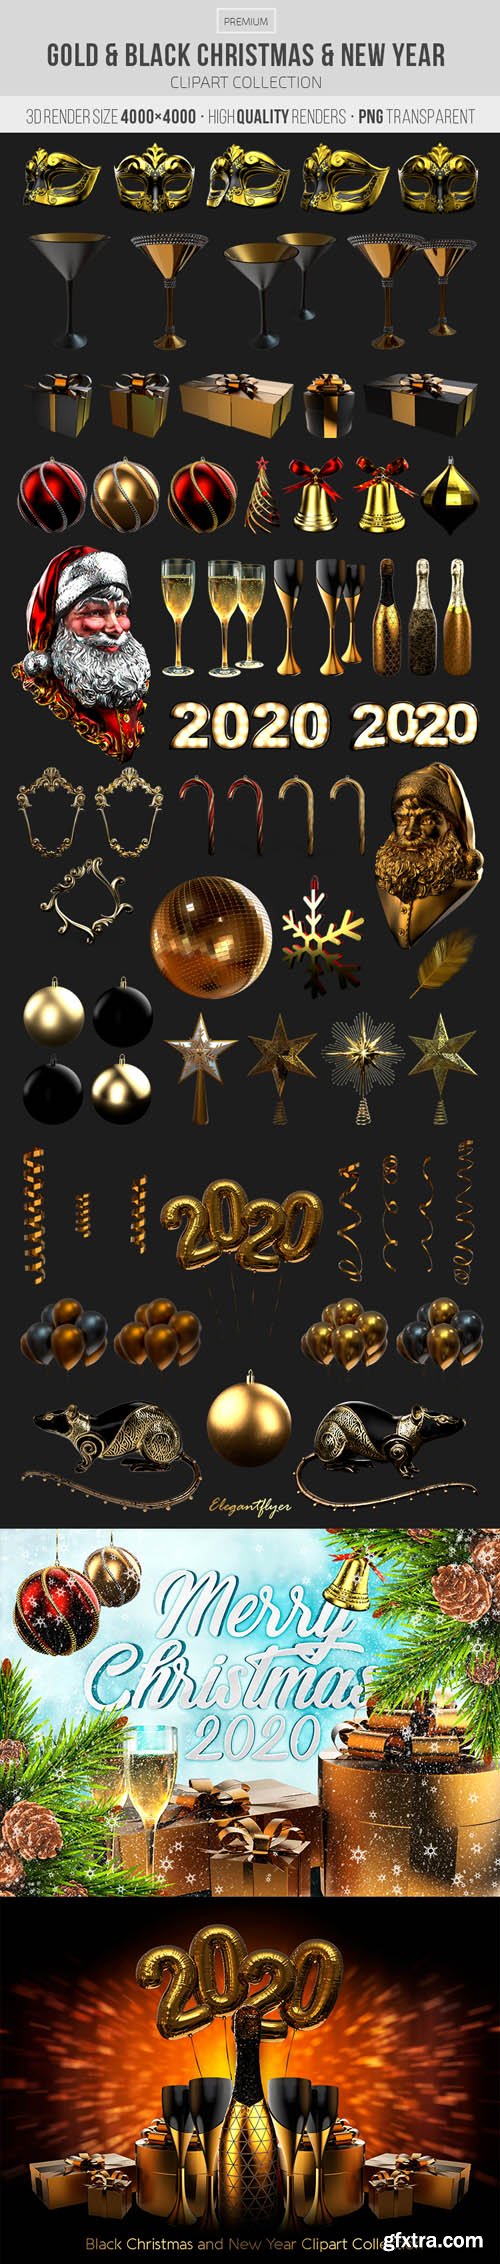 Gold and Black Christmas and New Year V2811 2019 Premium 3d Render Templates